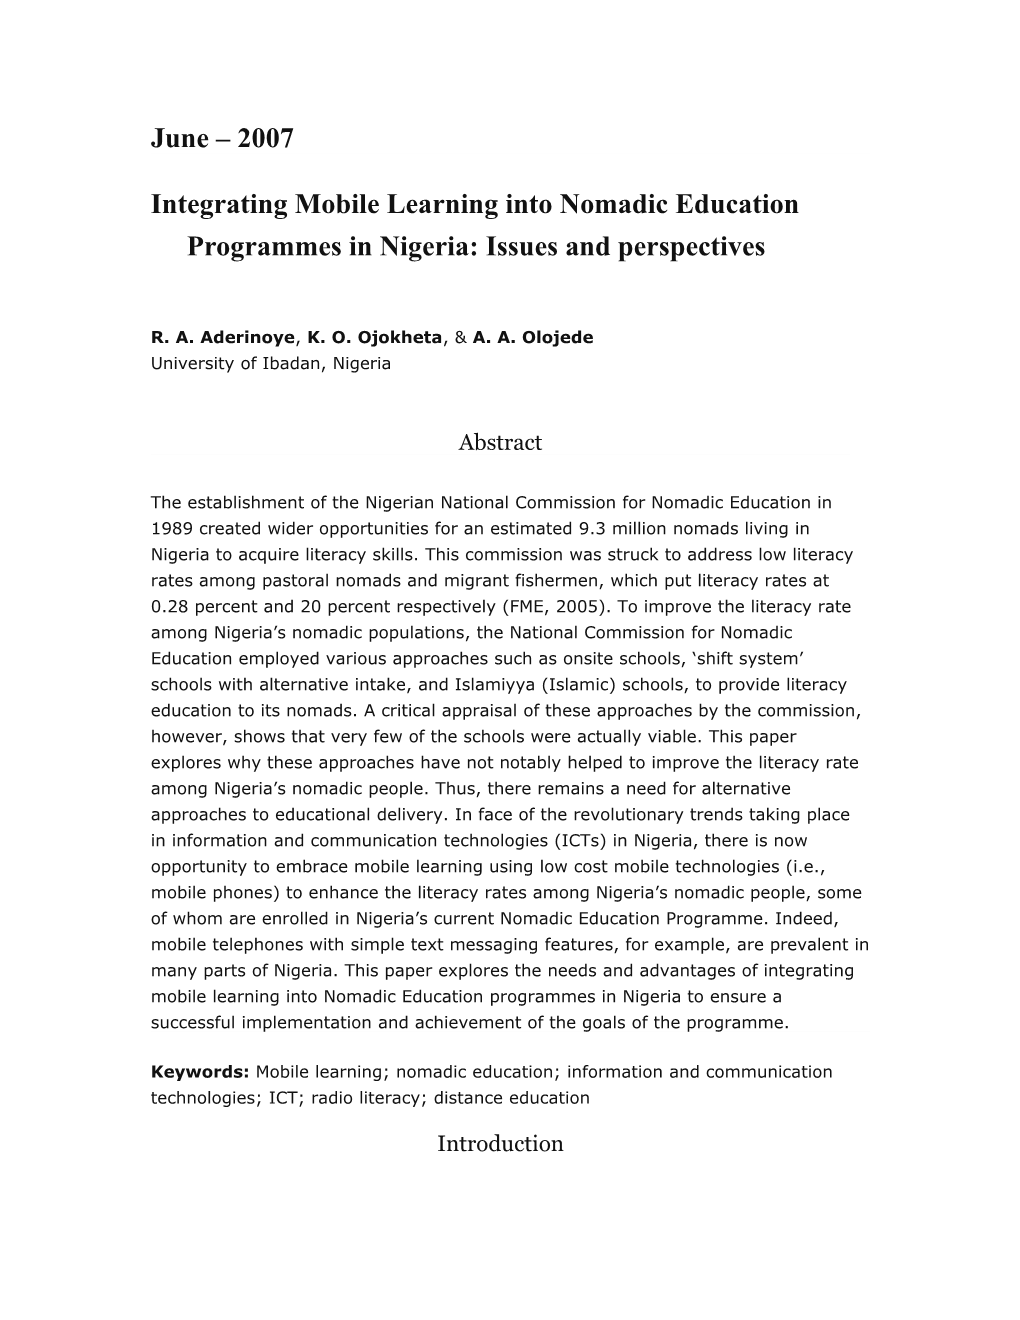 Integrating Mobile Learning Into Nomadic Education Programmes in Nigeria: Issues And